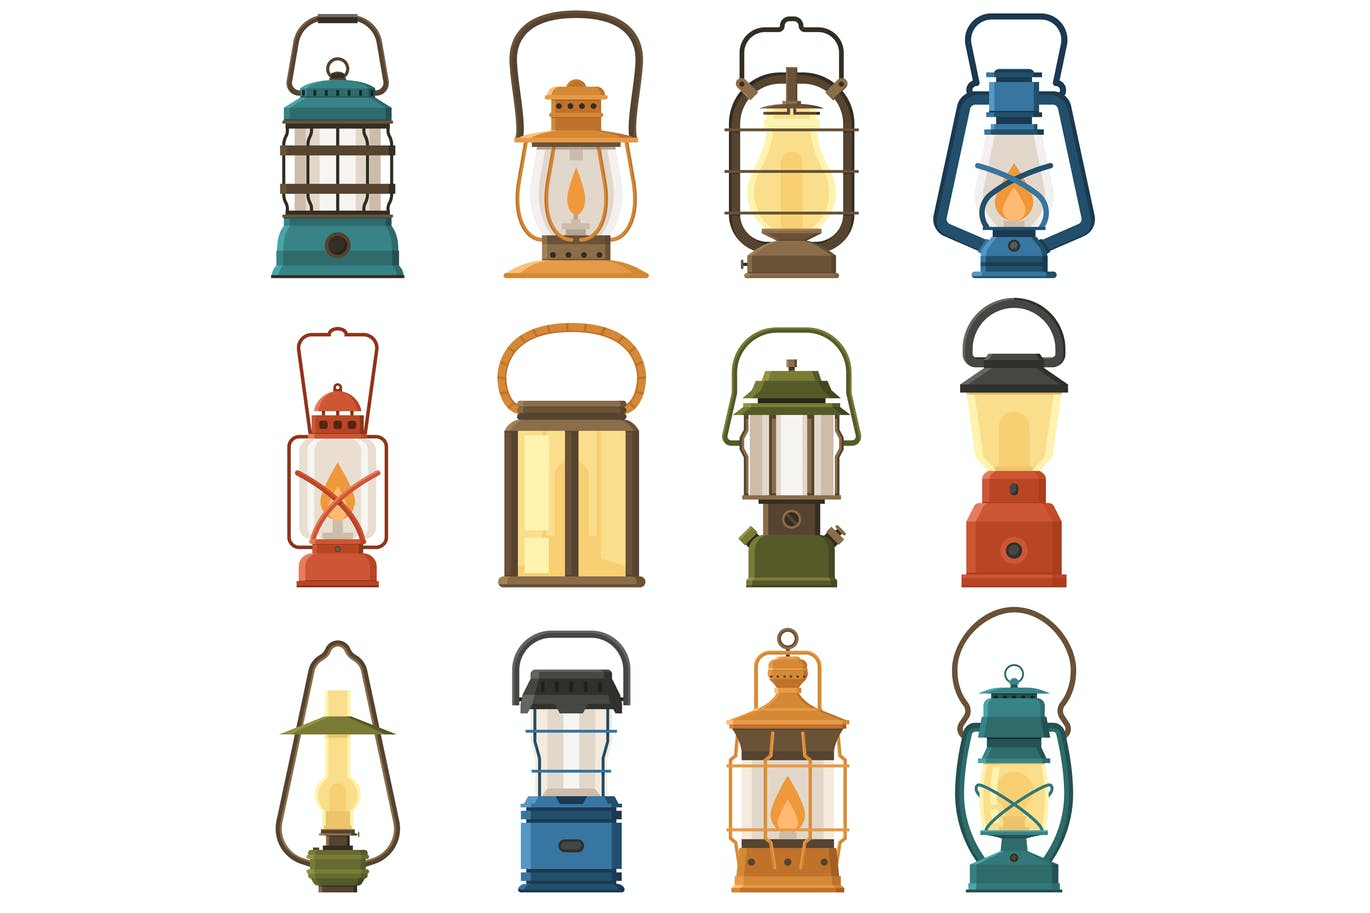 A vintage camping lamps and lanterns icon set